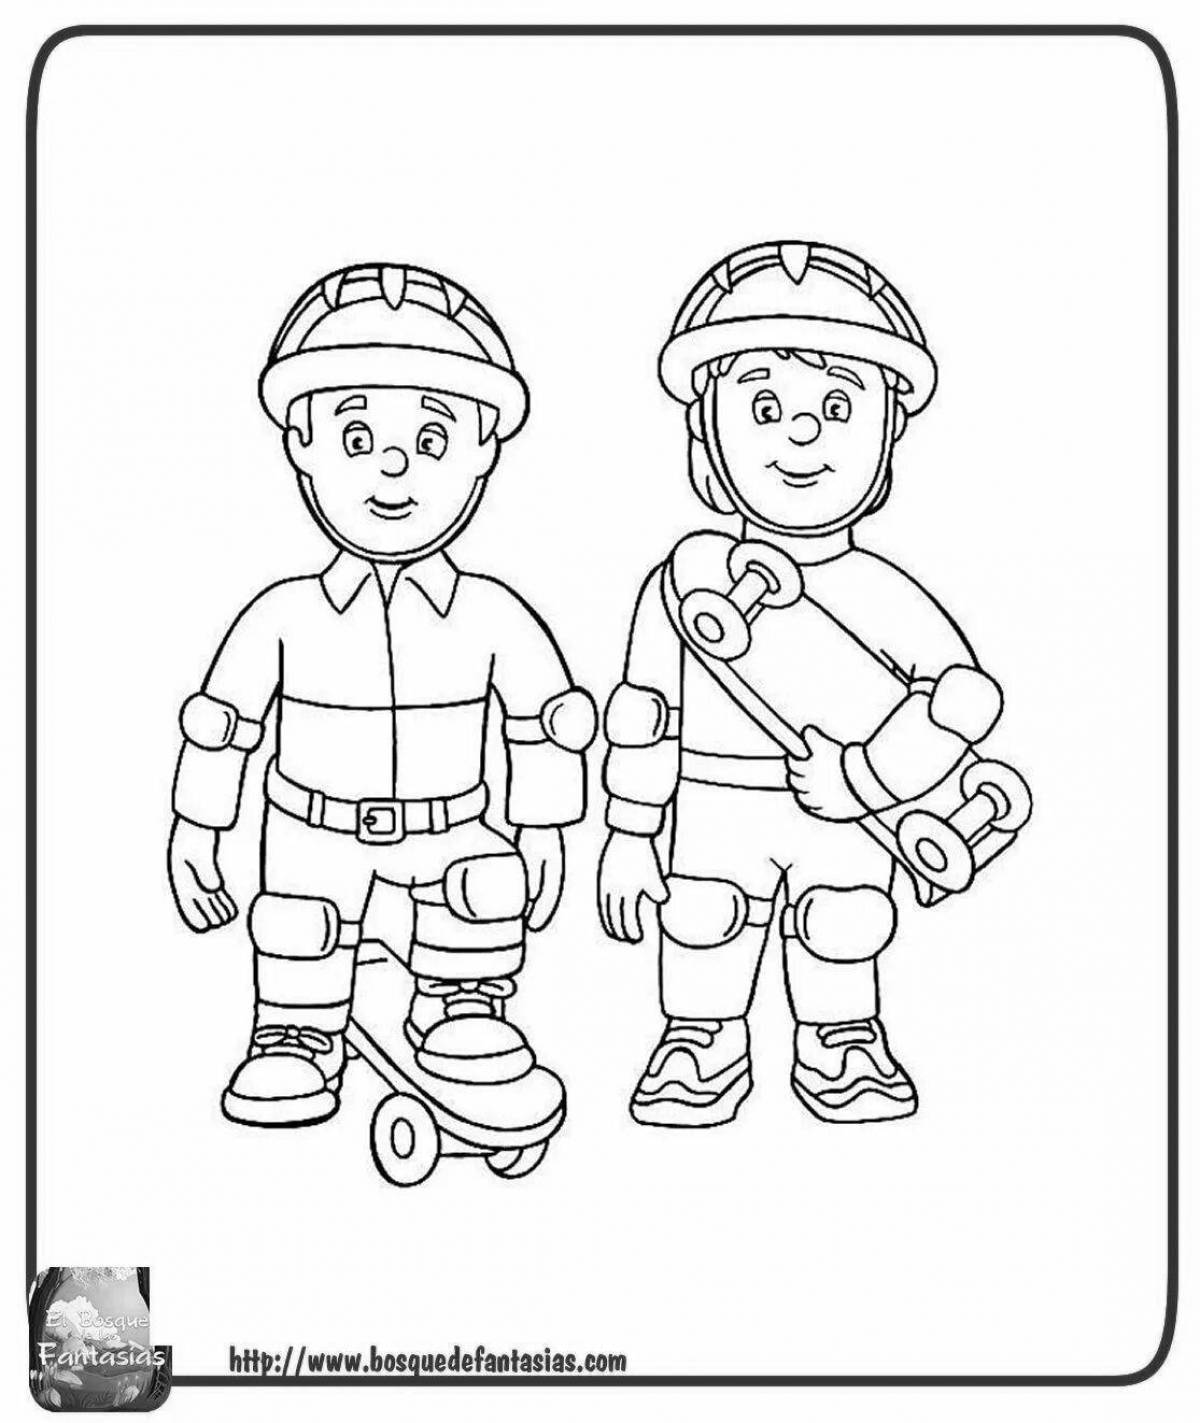 Exciting fireman coloring book for kids